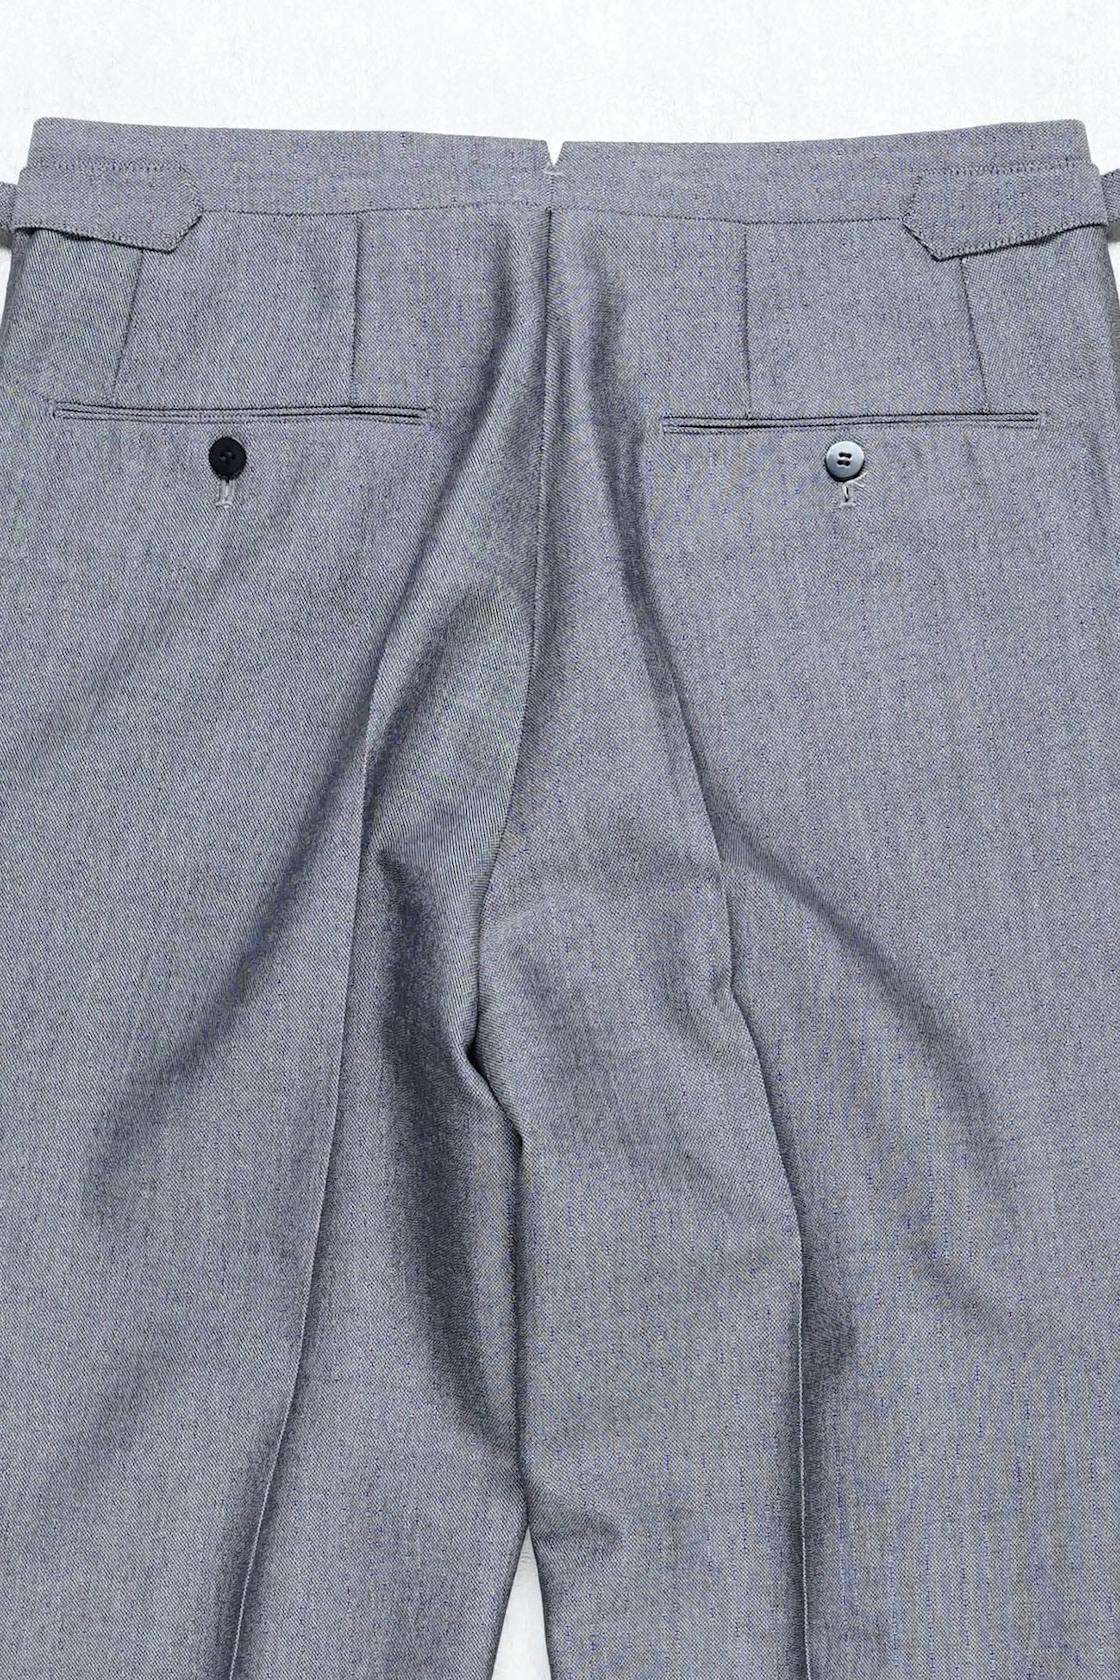 The Armoury by Osaku Steel Grey Wool/Mohair Pleated CO Trousers